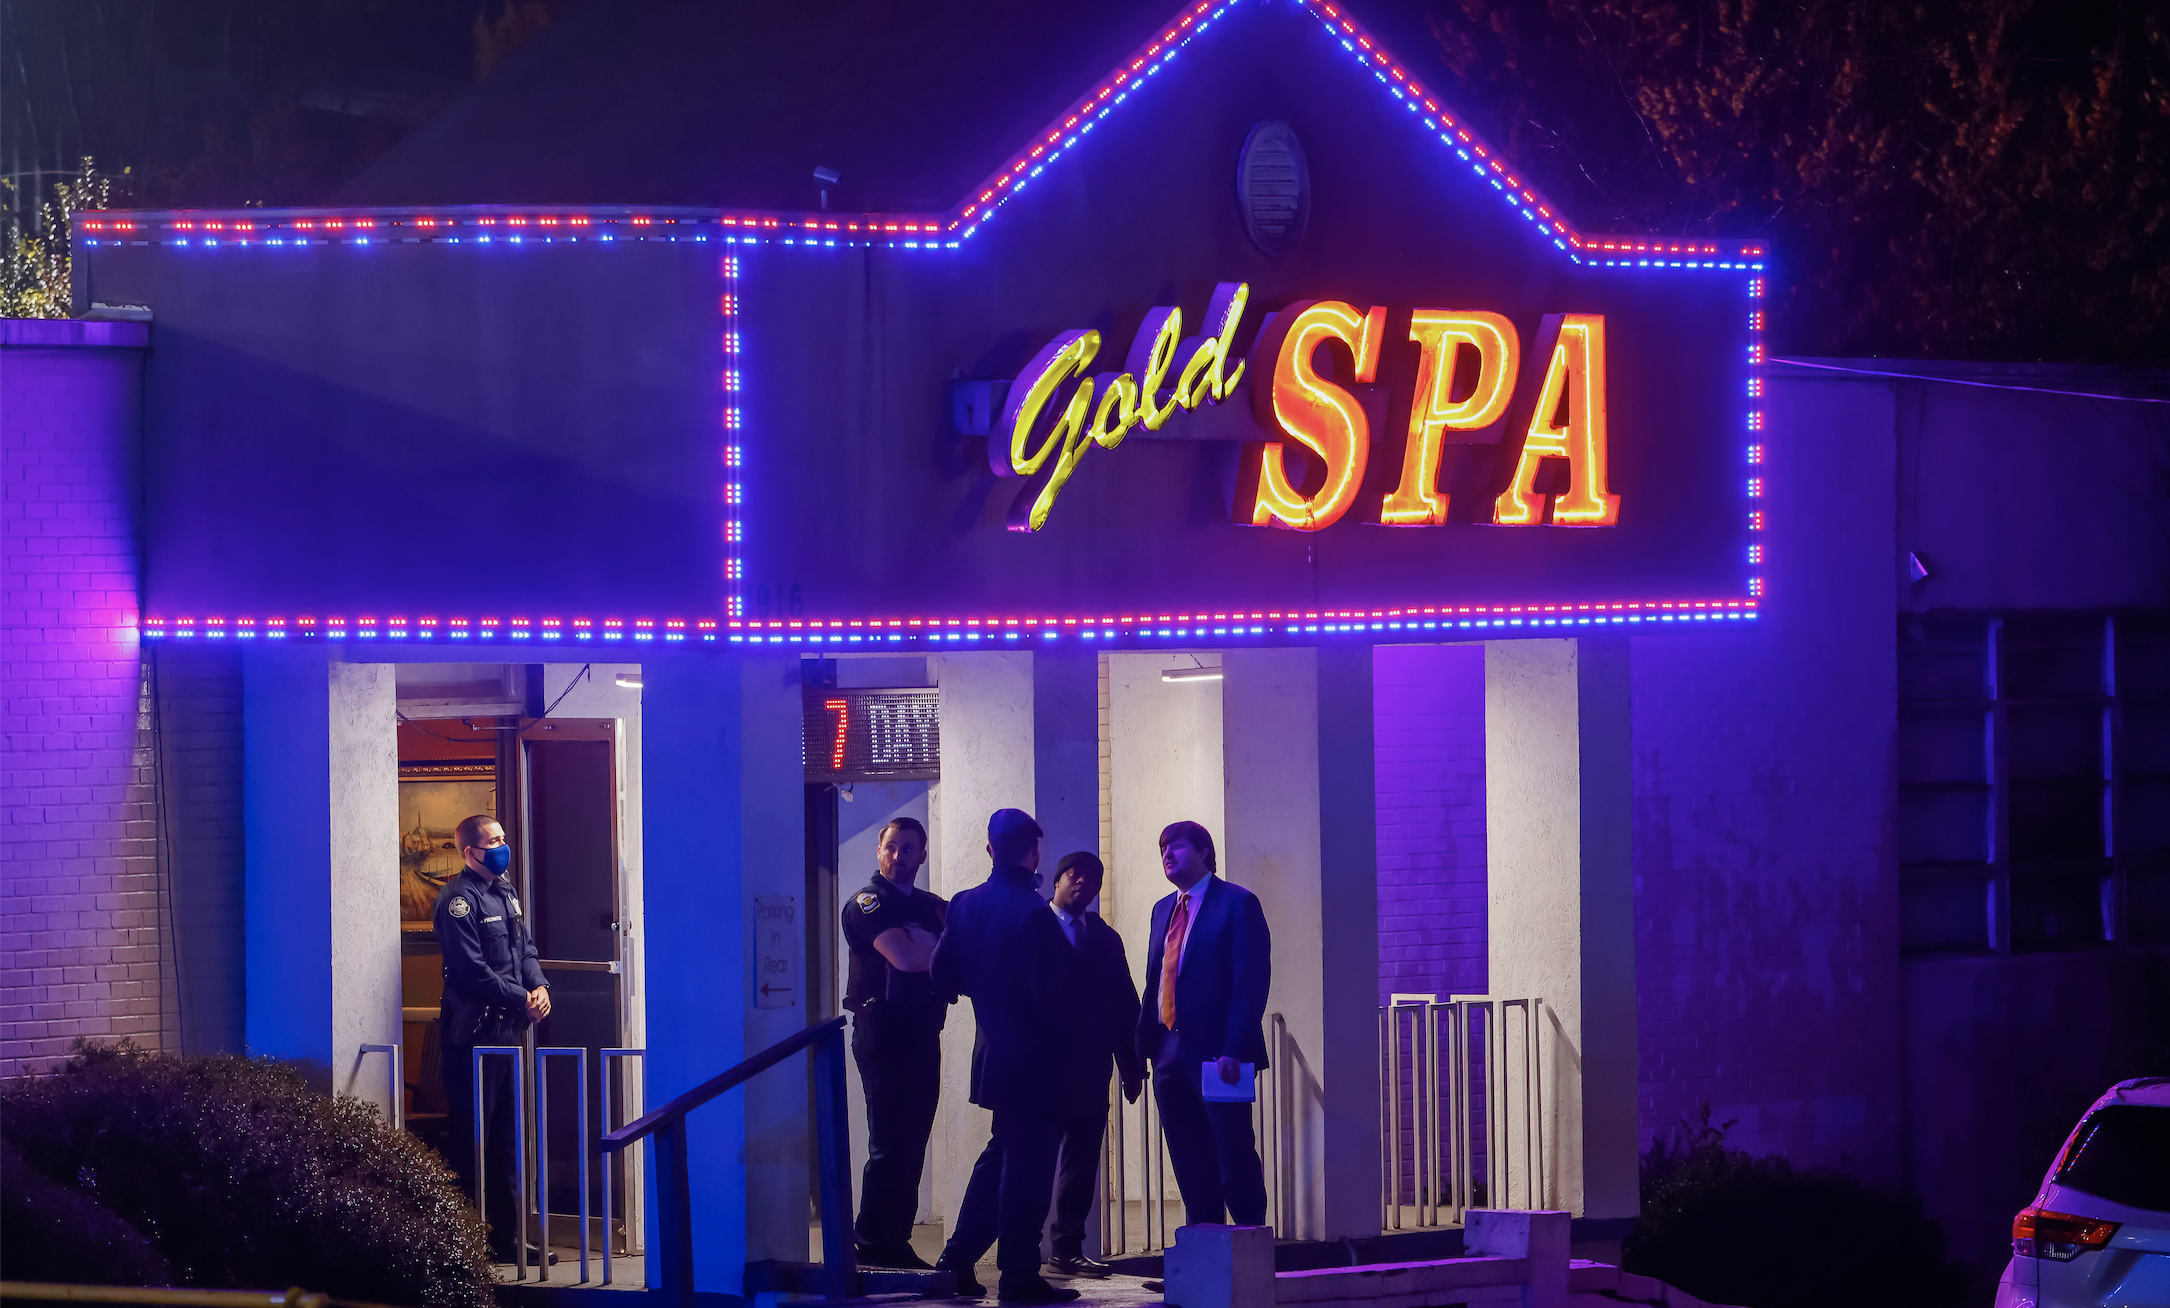 At least eight killed in multiple shootings at Asian massage spas in Atlanta area, USA - 16 Mar 2021